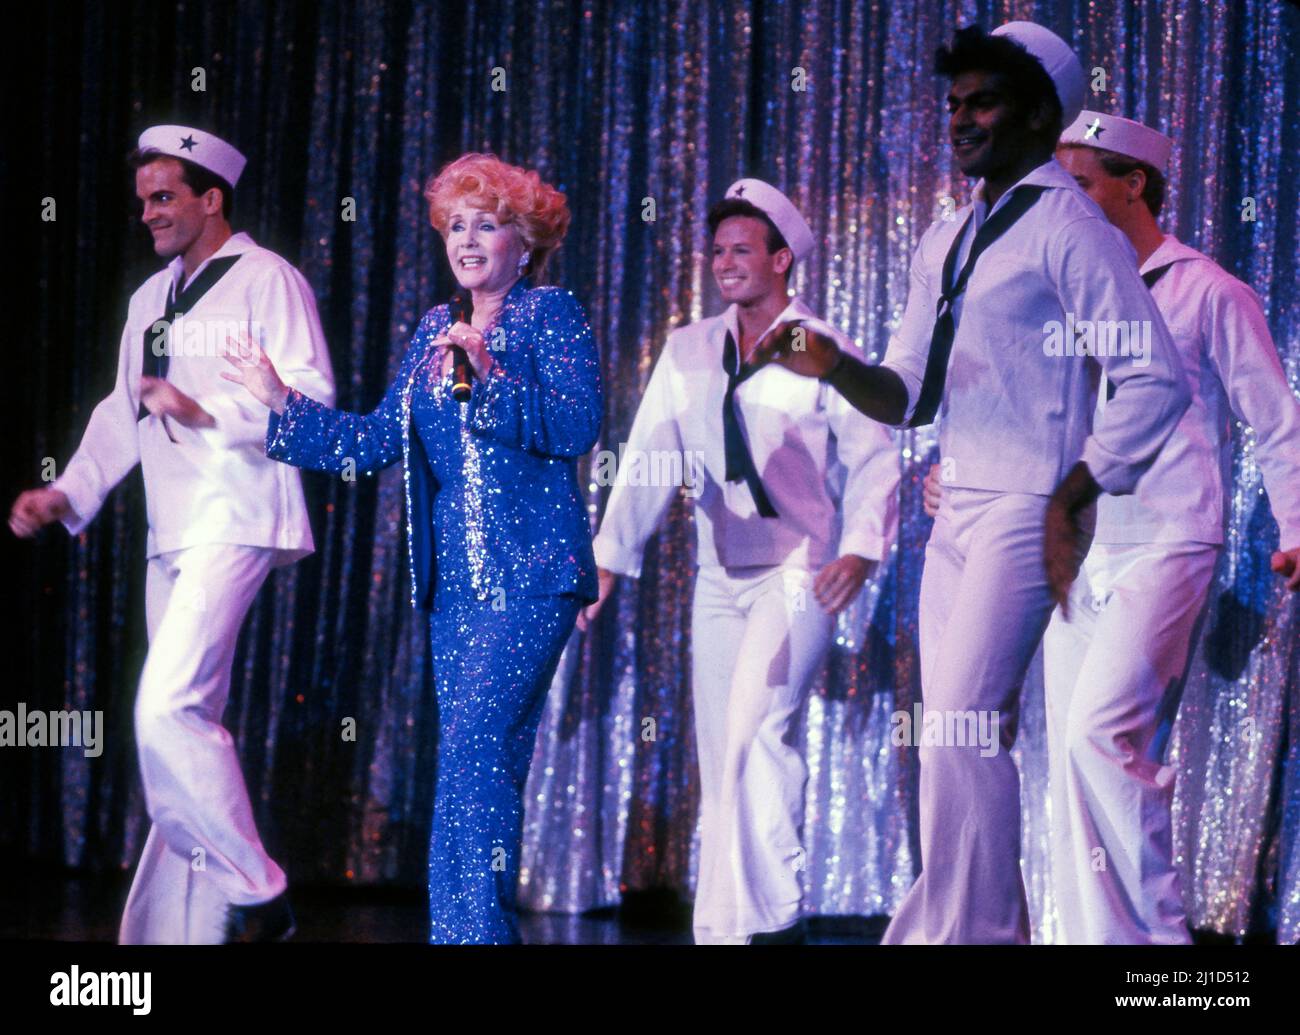 Debbie Reynolds performing a song and dance number at the Thalians Ball in Beverly Hills, CA. Stock Photo